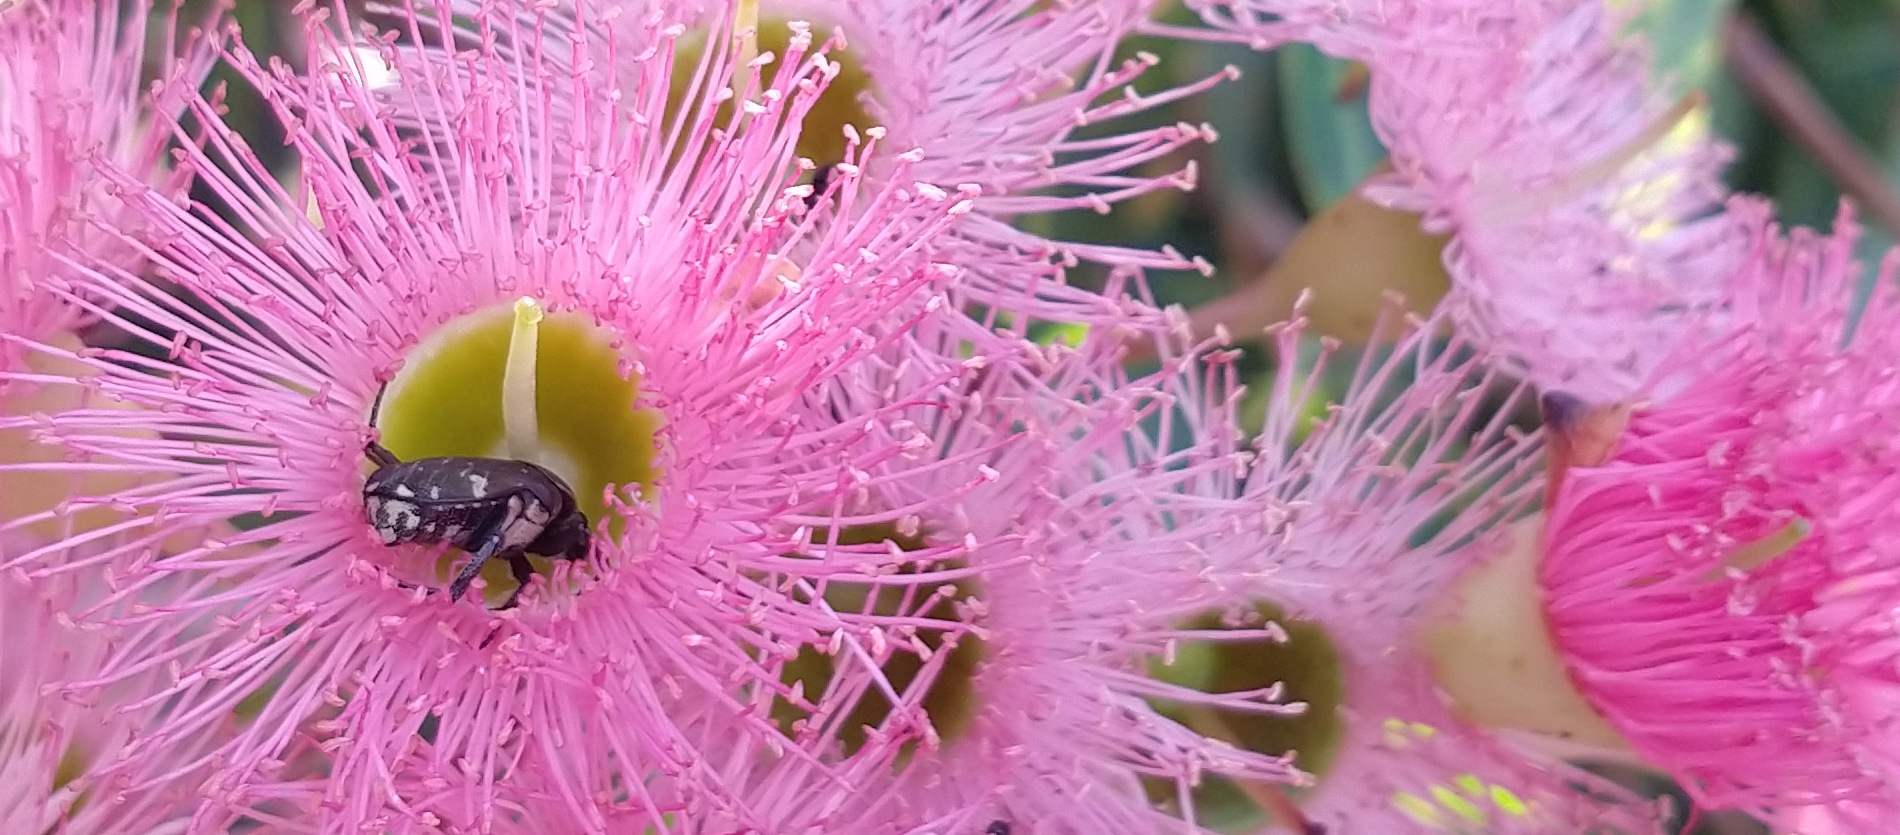 A beetle drinking nectar from a blossoming Marri flower